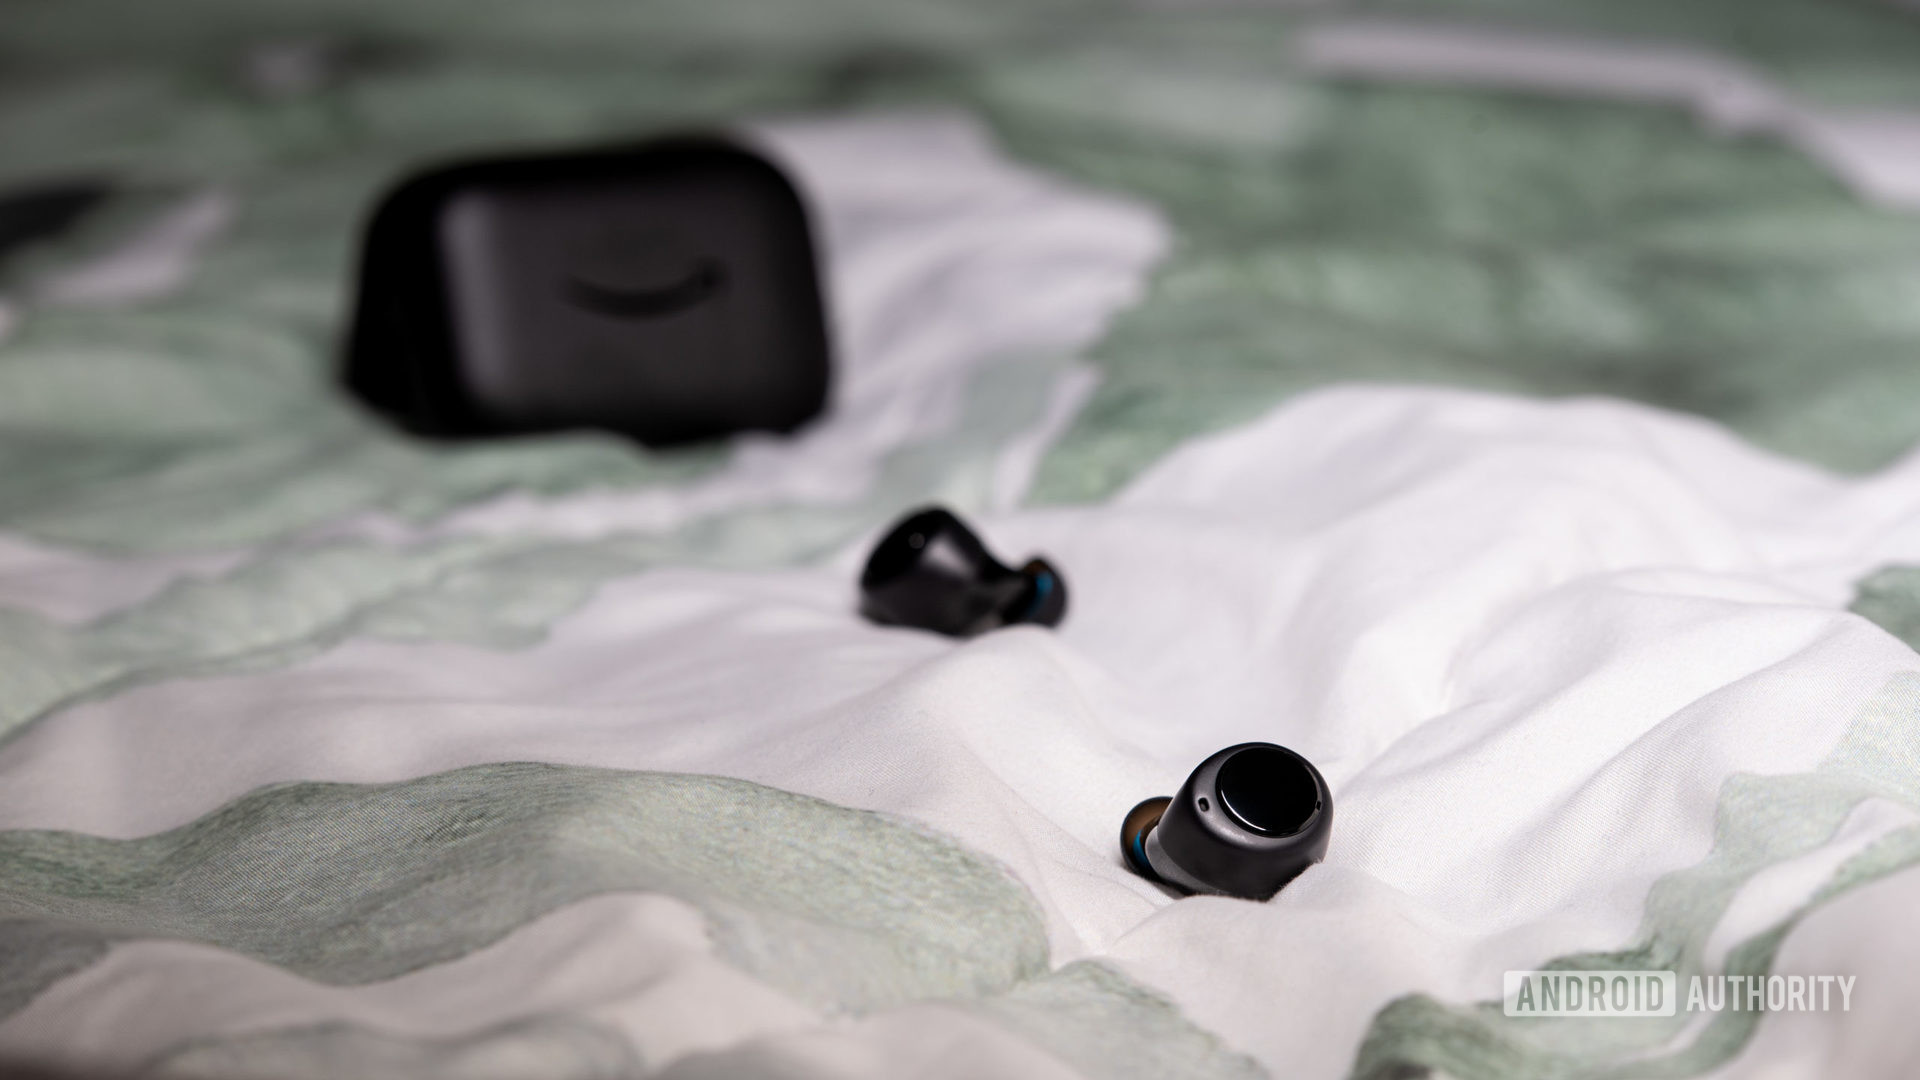 The Amazon Echo Buds true wireless earbuds outside of the case.